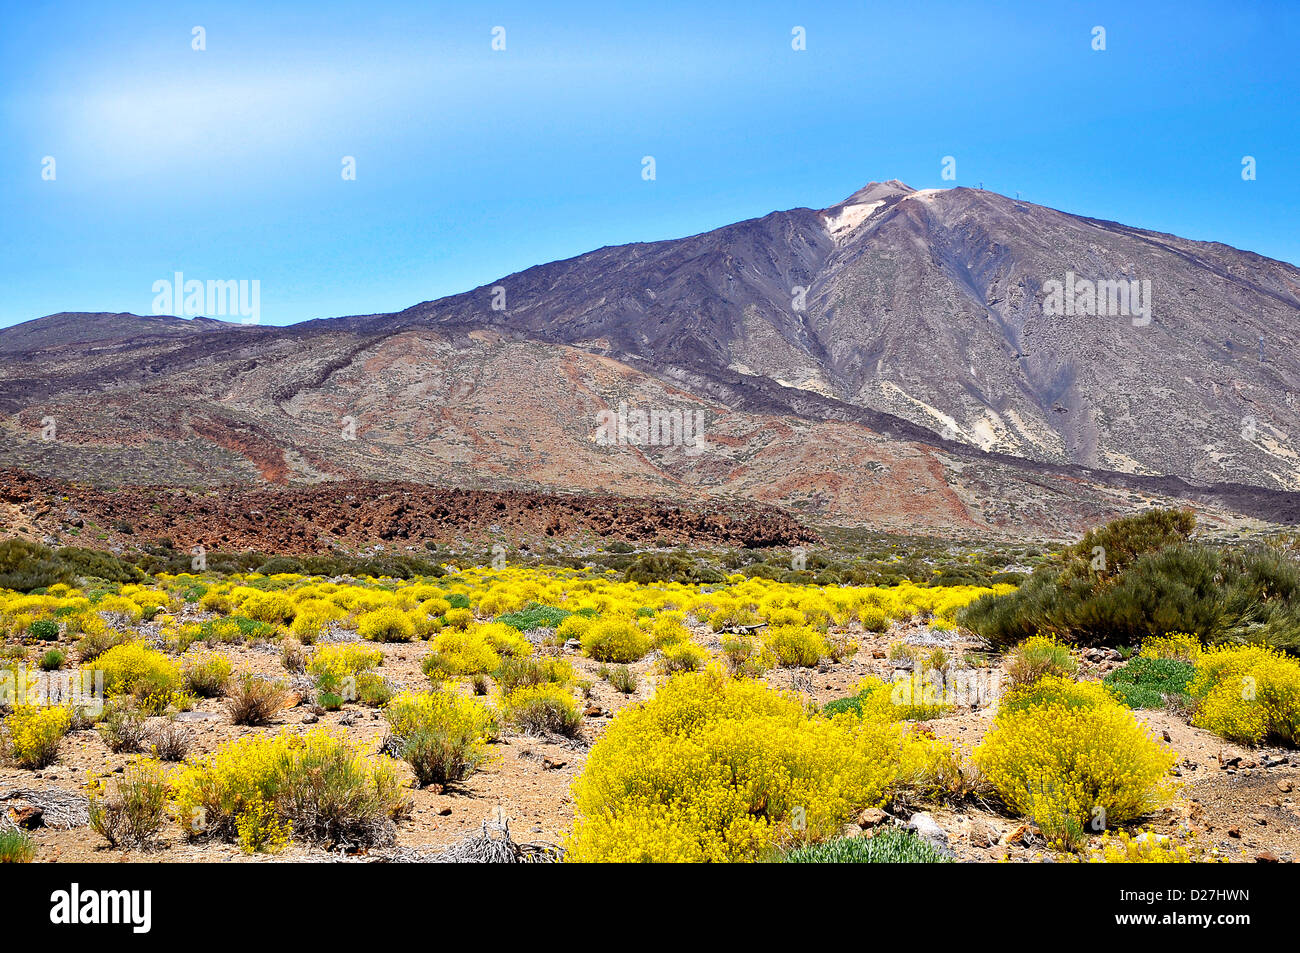 Mount Teide or, in Spanish, Pico del Teide (3718m), is a volcano at Tenerife in the Spanish Canary Islands. Stock Photo